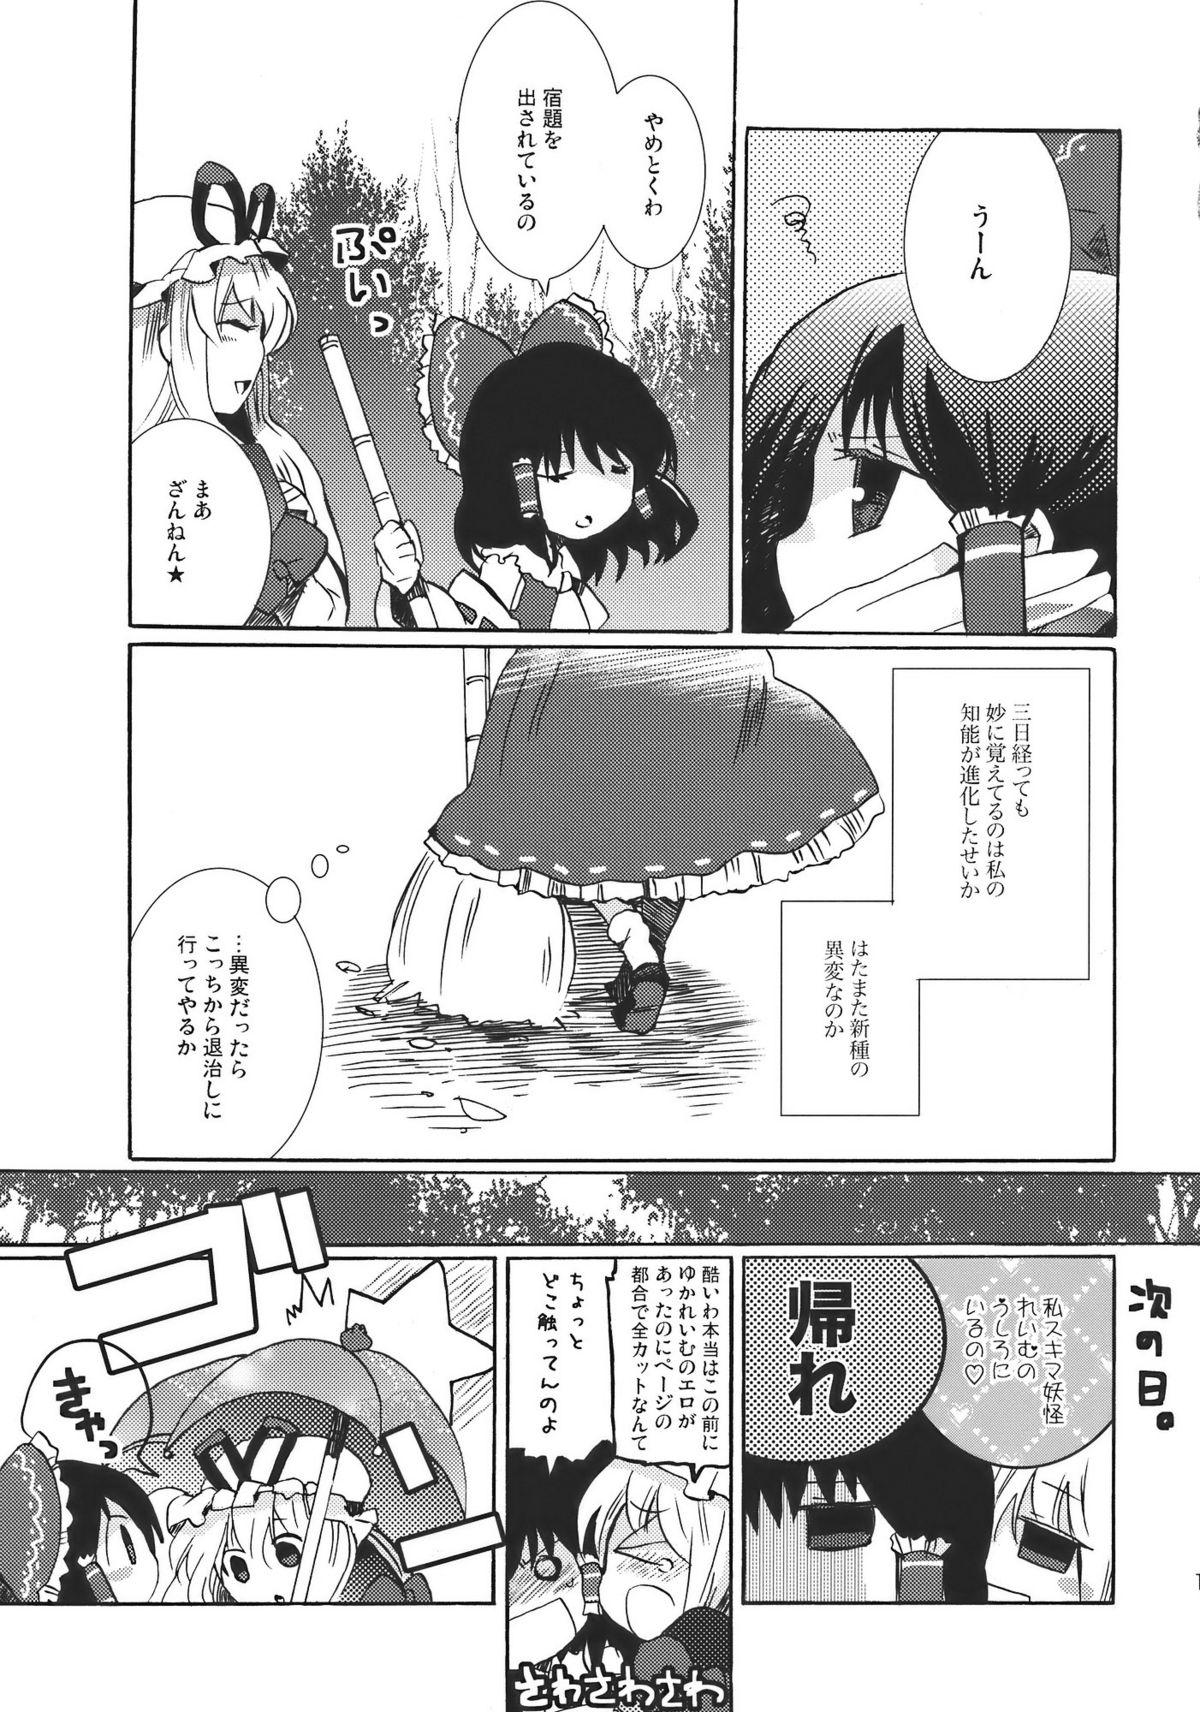 Dom Yumeiro Dolce - Touhou project Hotwife - Page 11